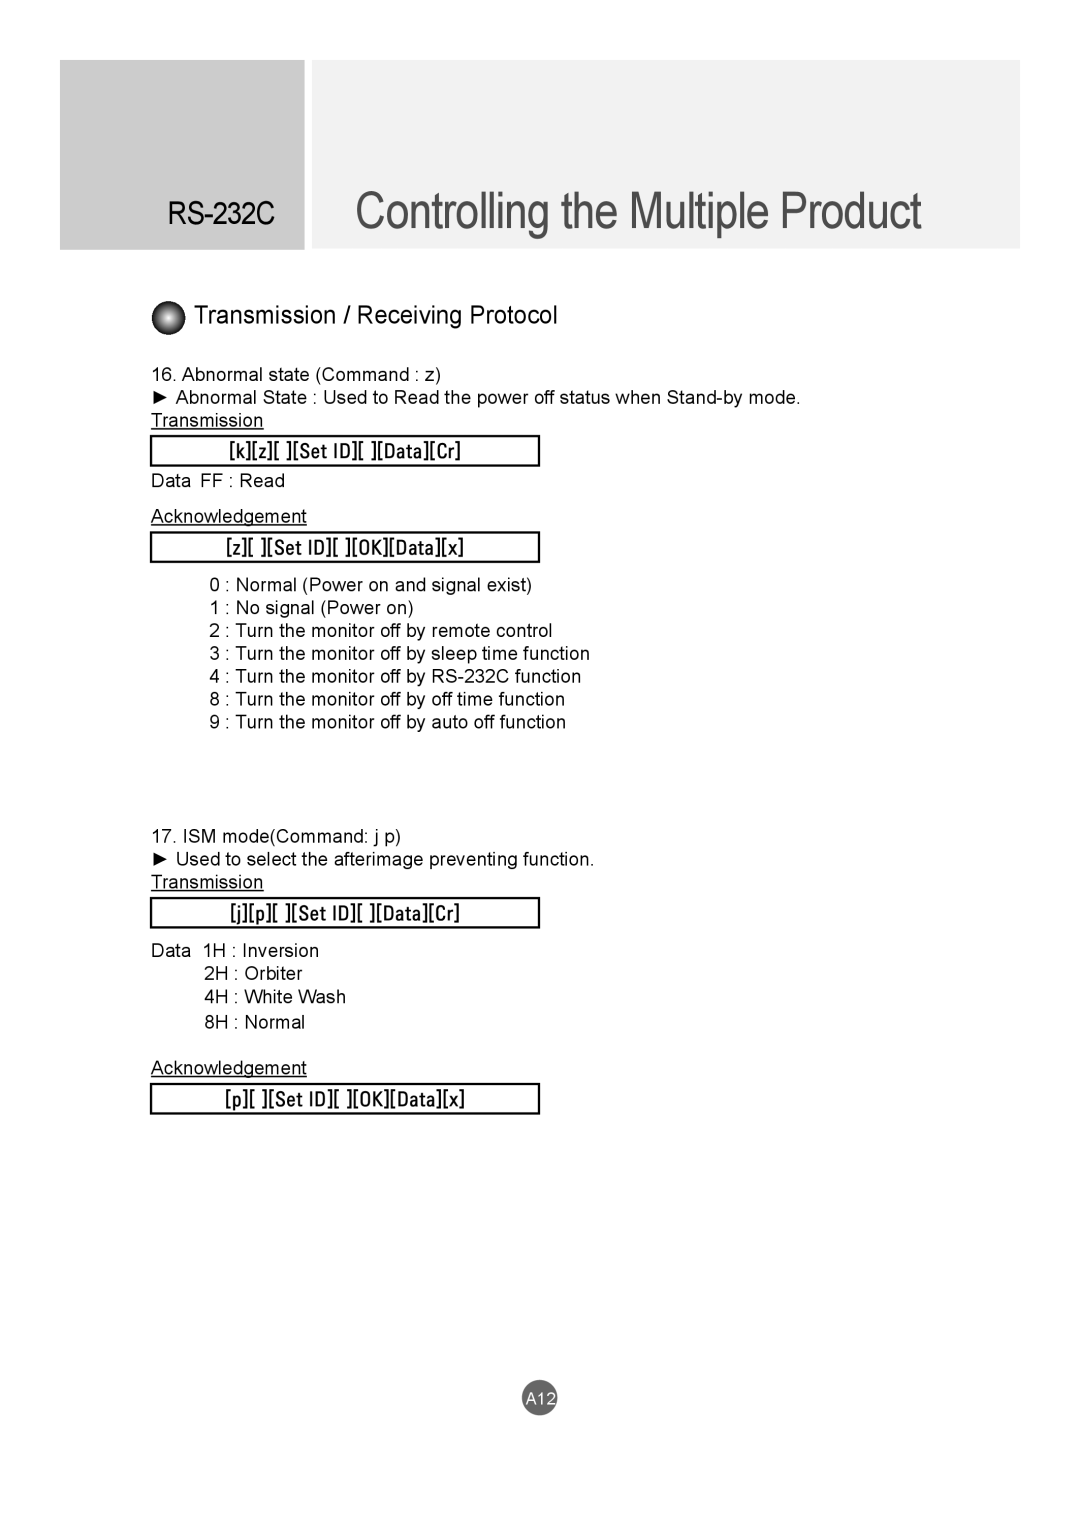 LG Electronics M4720C, M5520C owner manual Controlling the Multiple Product, RS-232C, Transmission / Receiving Protocol 